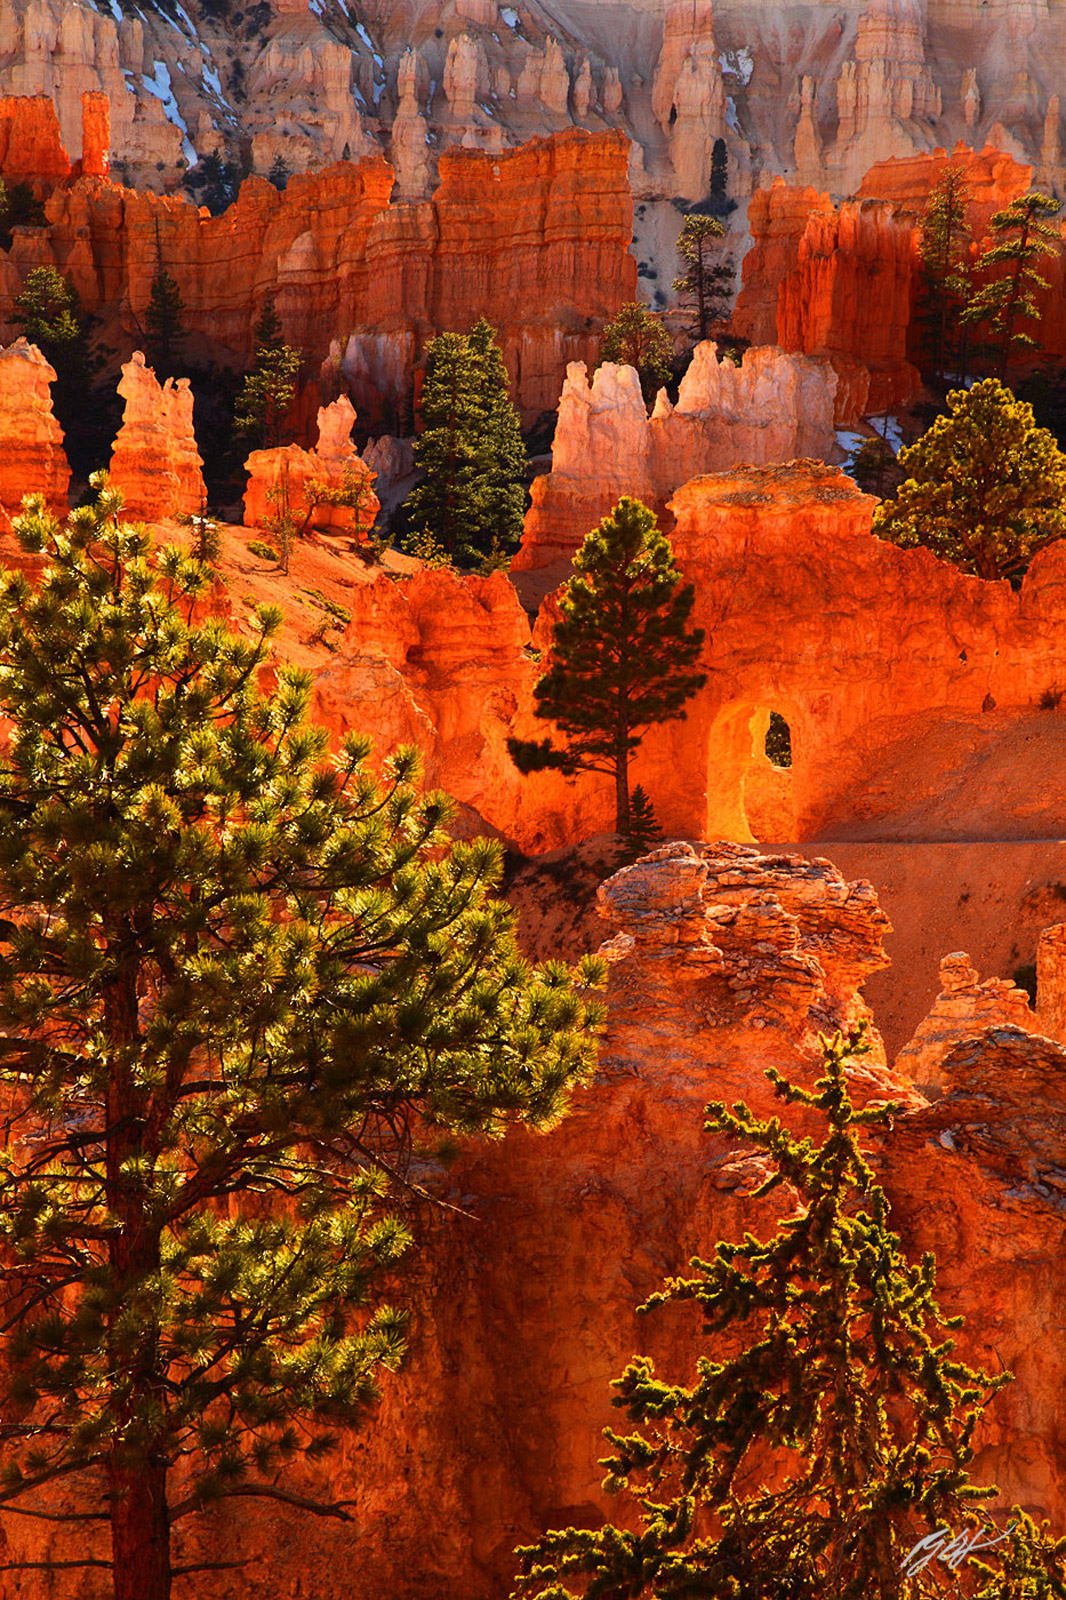 Peak-a-Book Passage on the Peak-a-Boo Trail in Bryce Canyon National Park, Utah